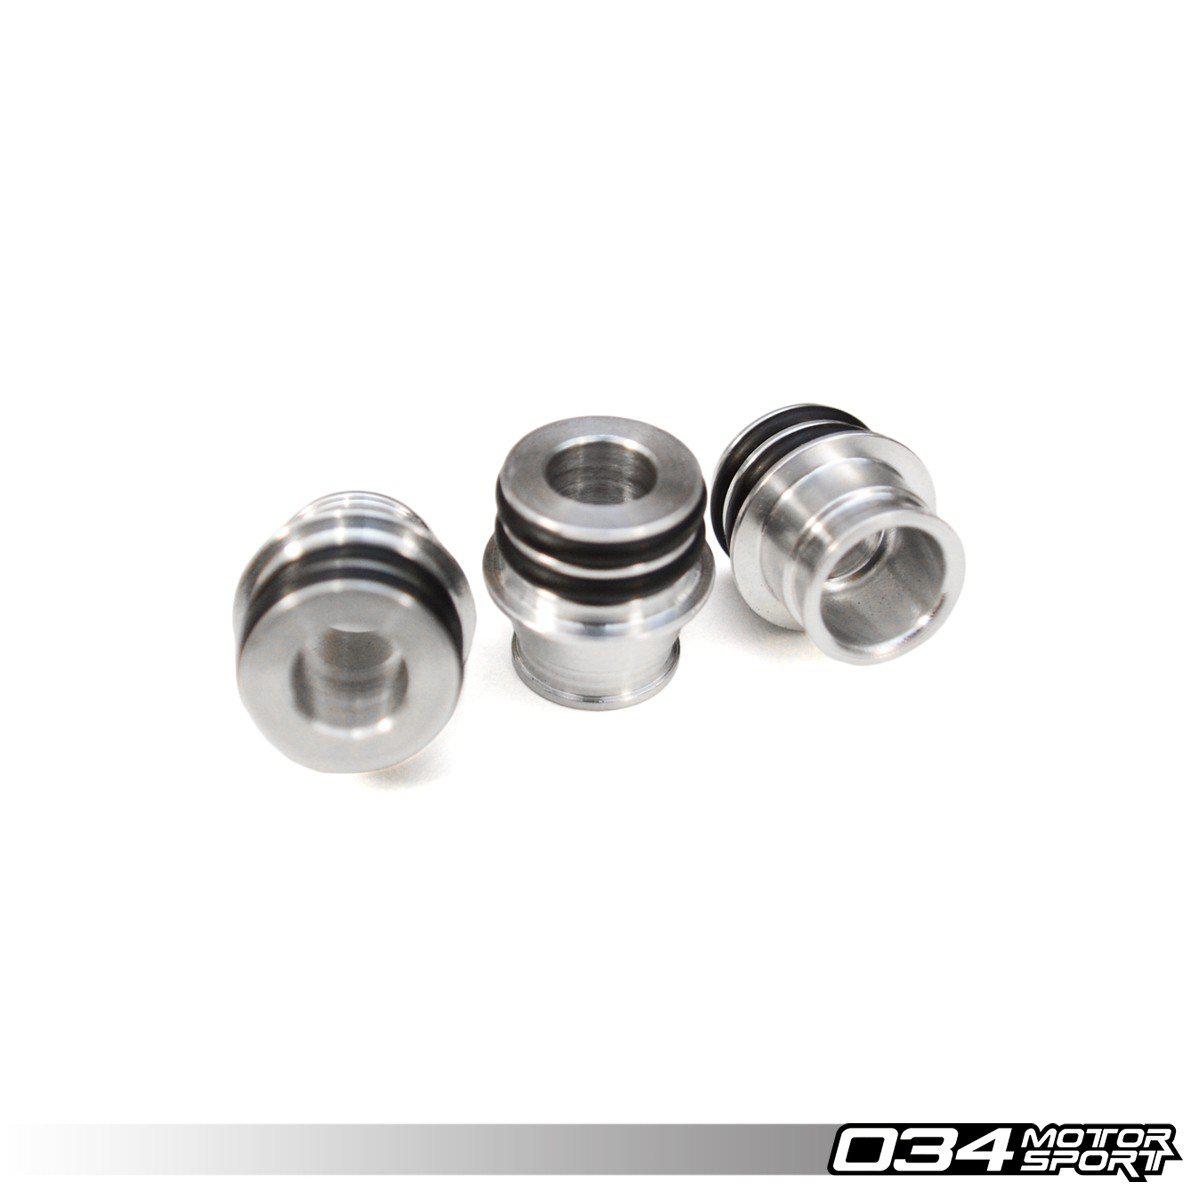 Audi 7a Efi Injector Adapter Kit For B3 Audi 80/90/Coupe Quattro I5 20v - Improved-A Little Tuning Co